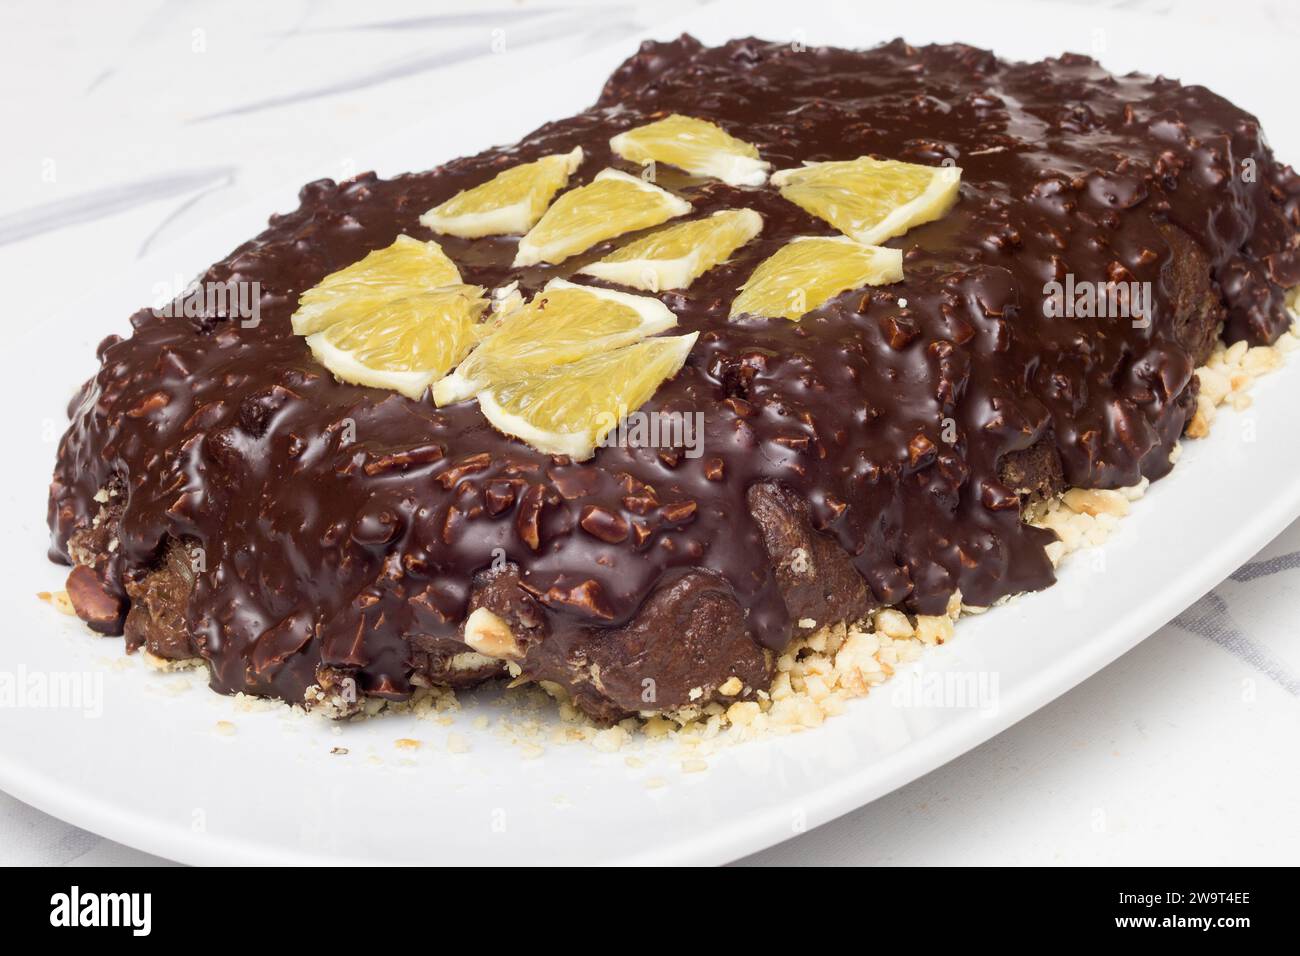 A homemade chocolate and almond delight topped with orange slices, placed on a white ceramic platter on a table covered with a tablecloth. food and ho Stock Photo